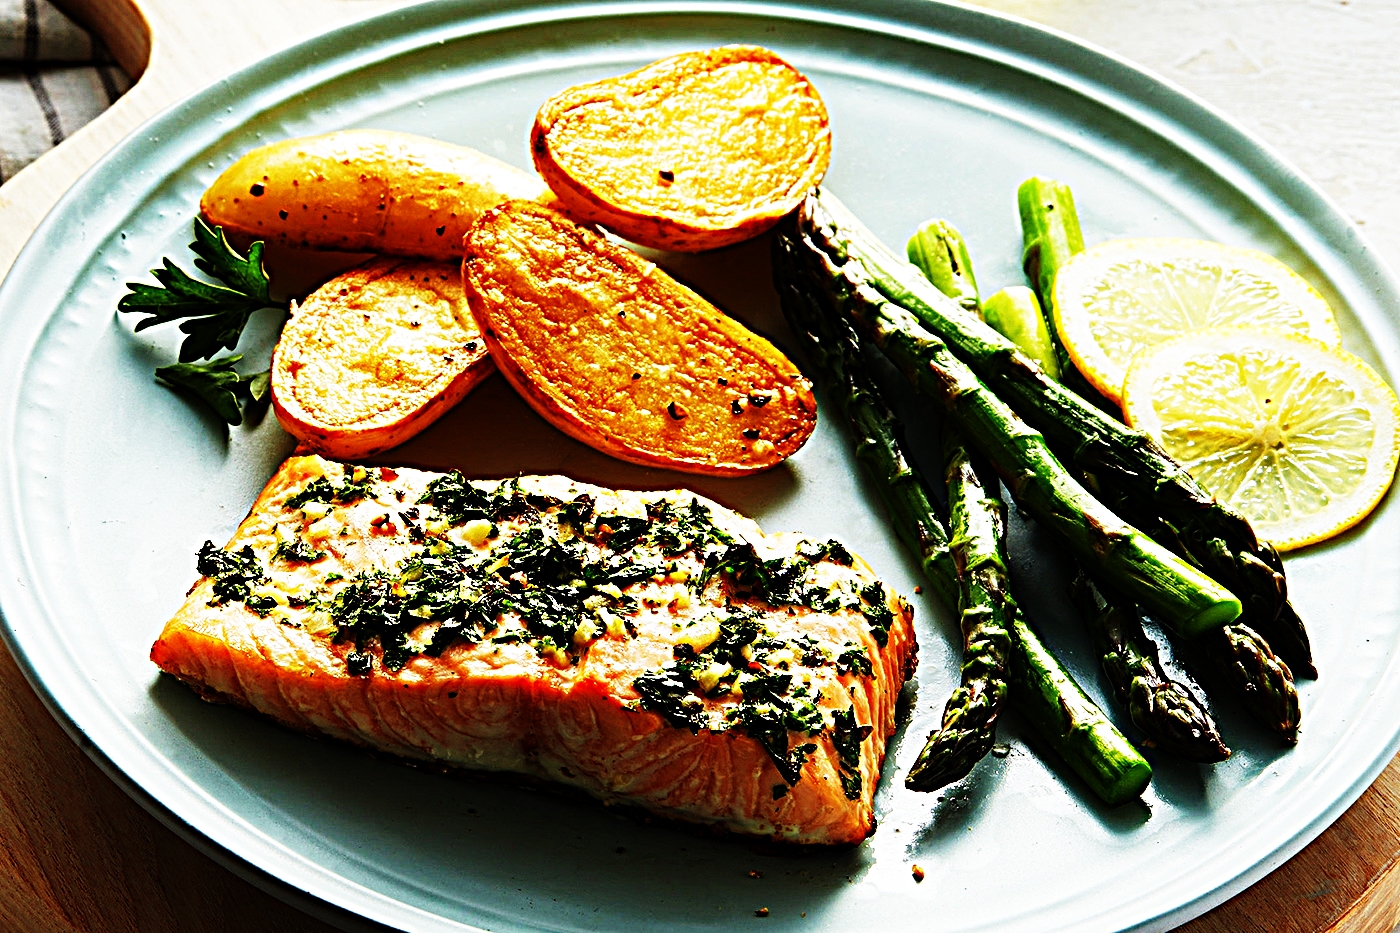 Stupid-Easy Recipe for Easy Baked Salmon with Herb Butter (#1 Top-Rated)